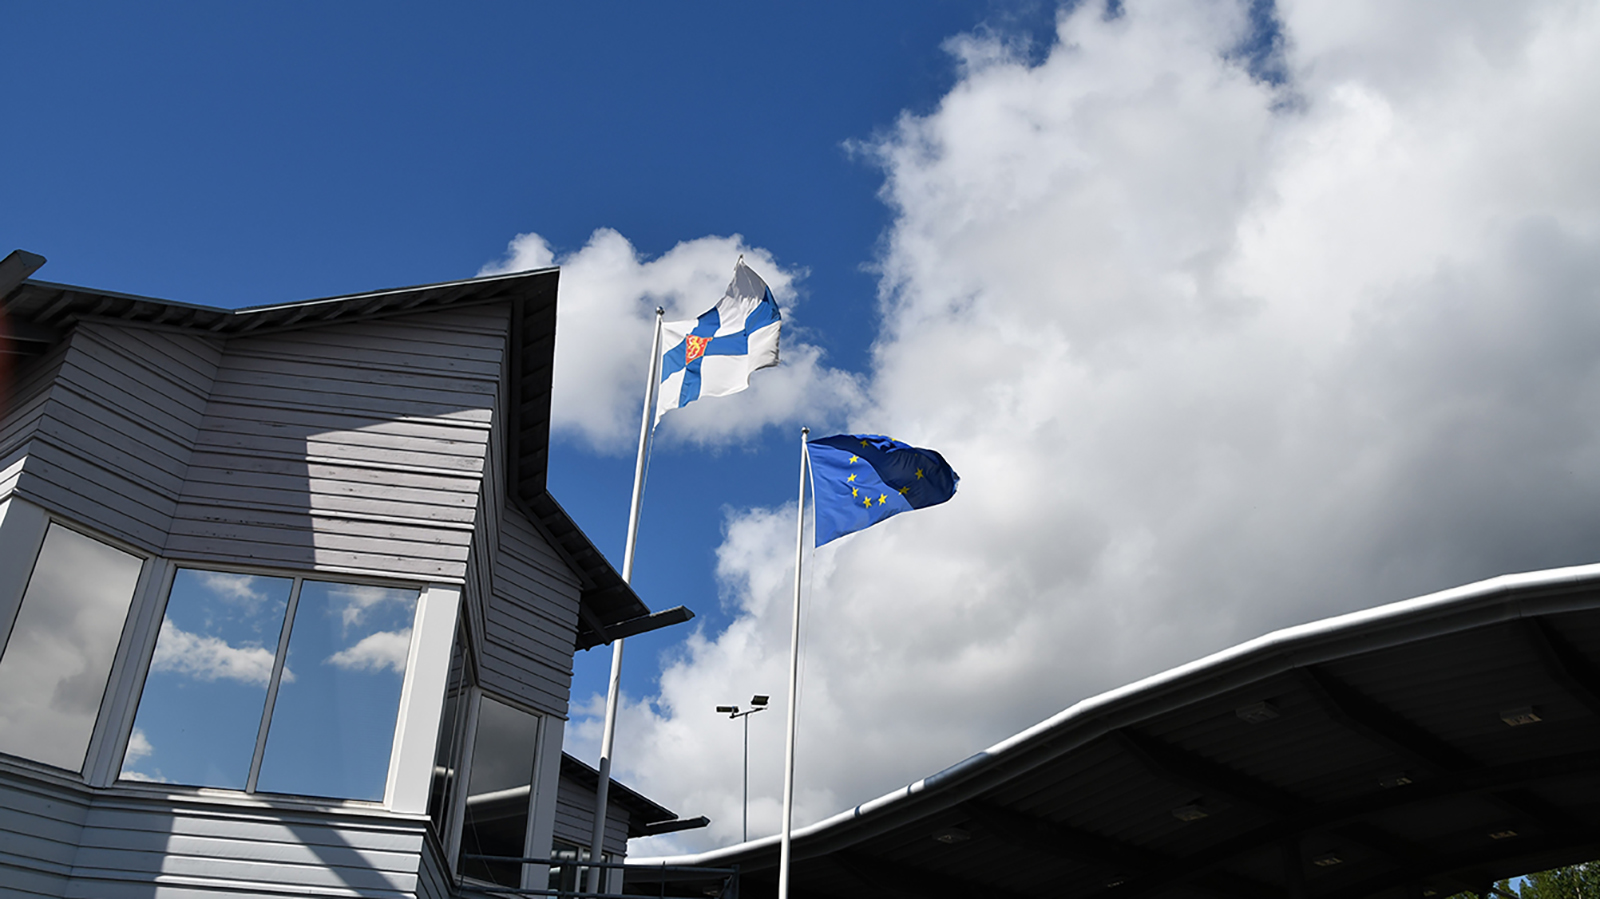 Finland's and EU's flags in the Vartius border crossing point in August 2021.